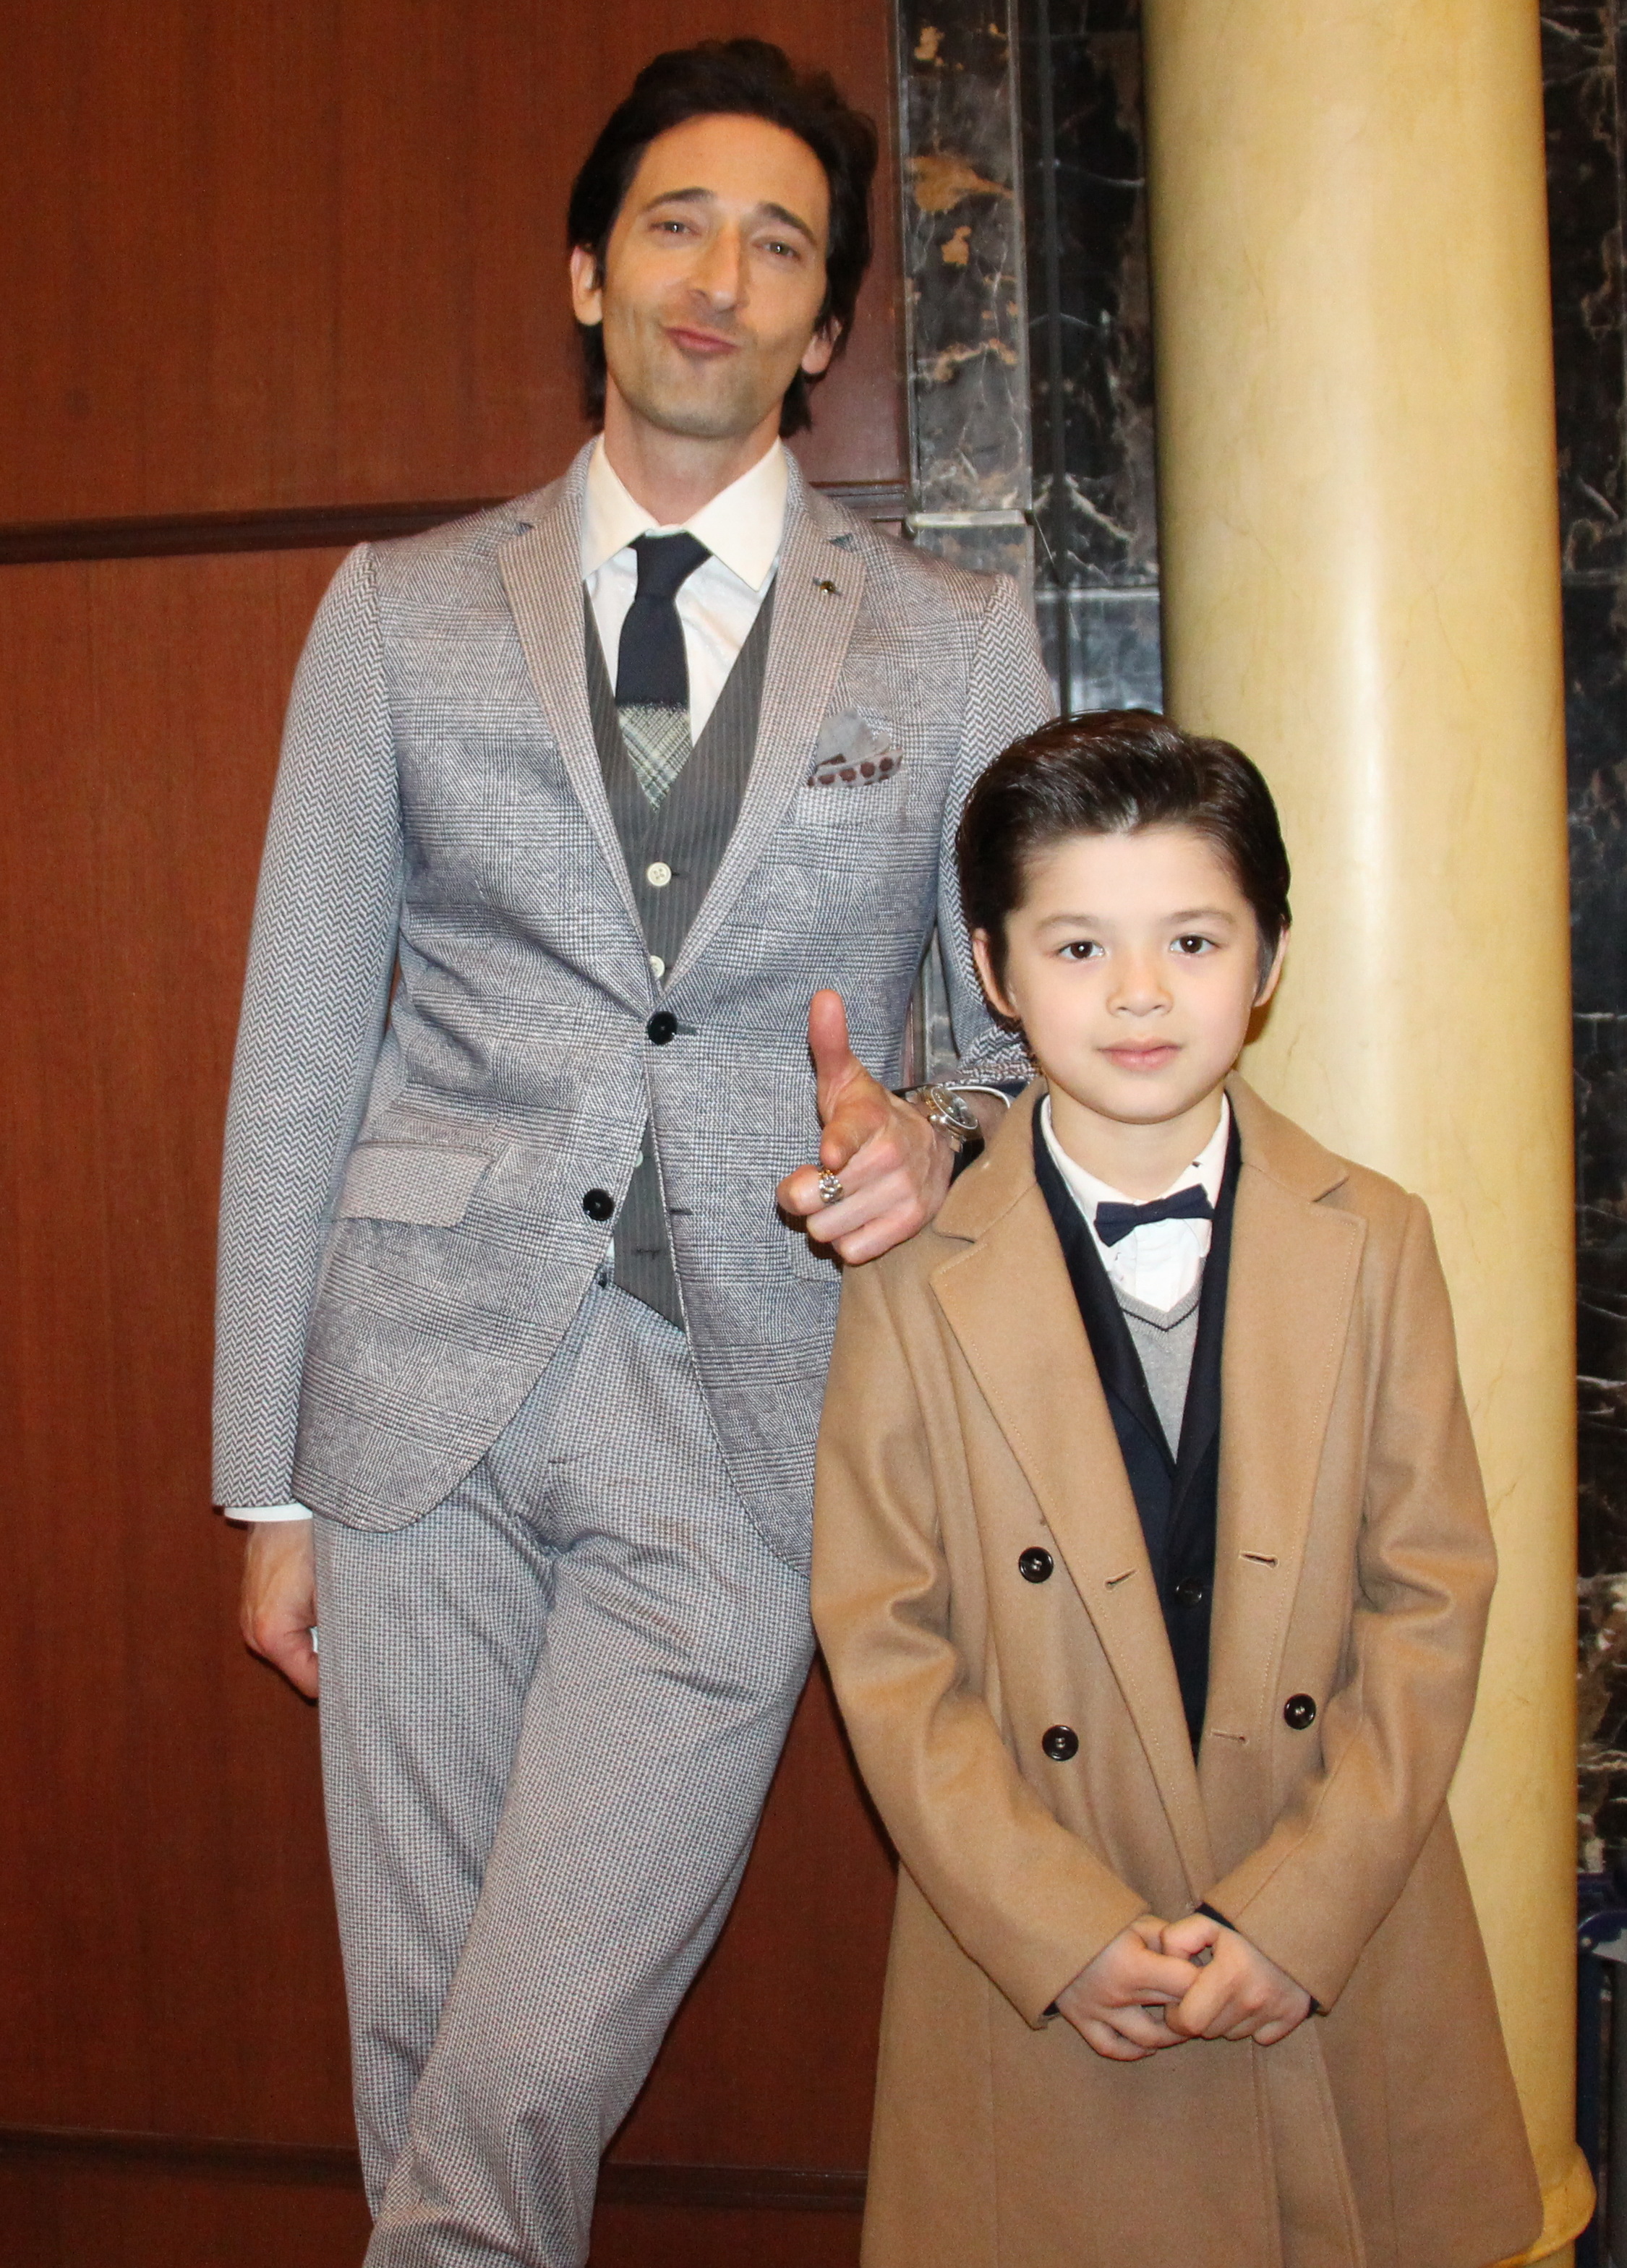 Adrien Brody with Jozef Waite in Beijing, China for the Dragon Blade premiere.